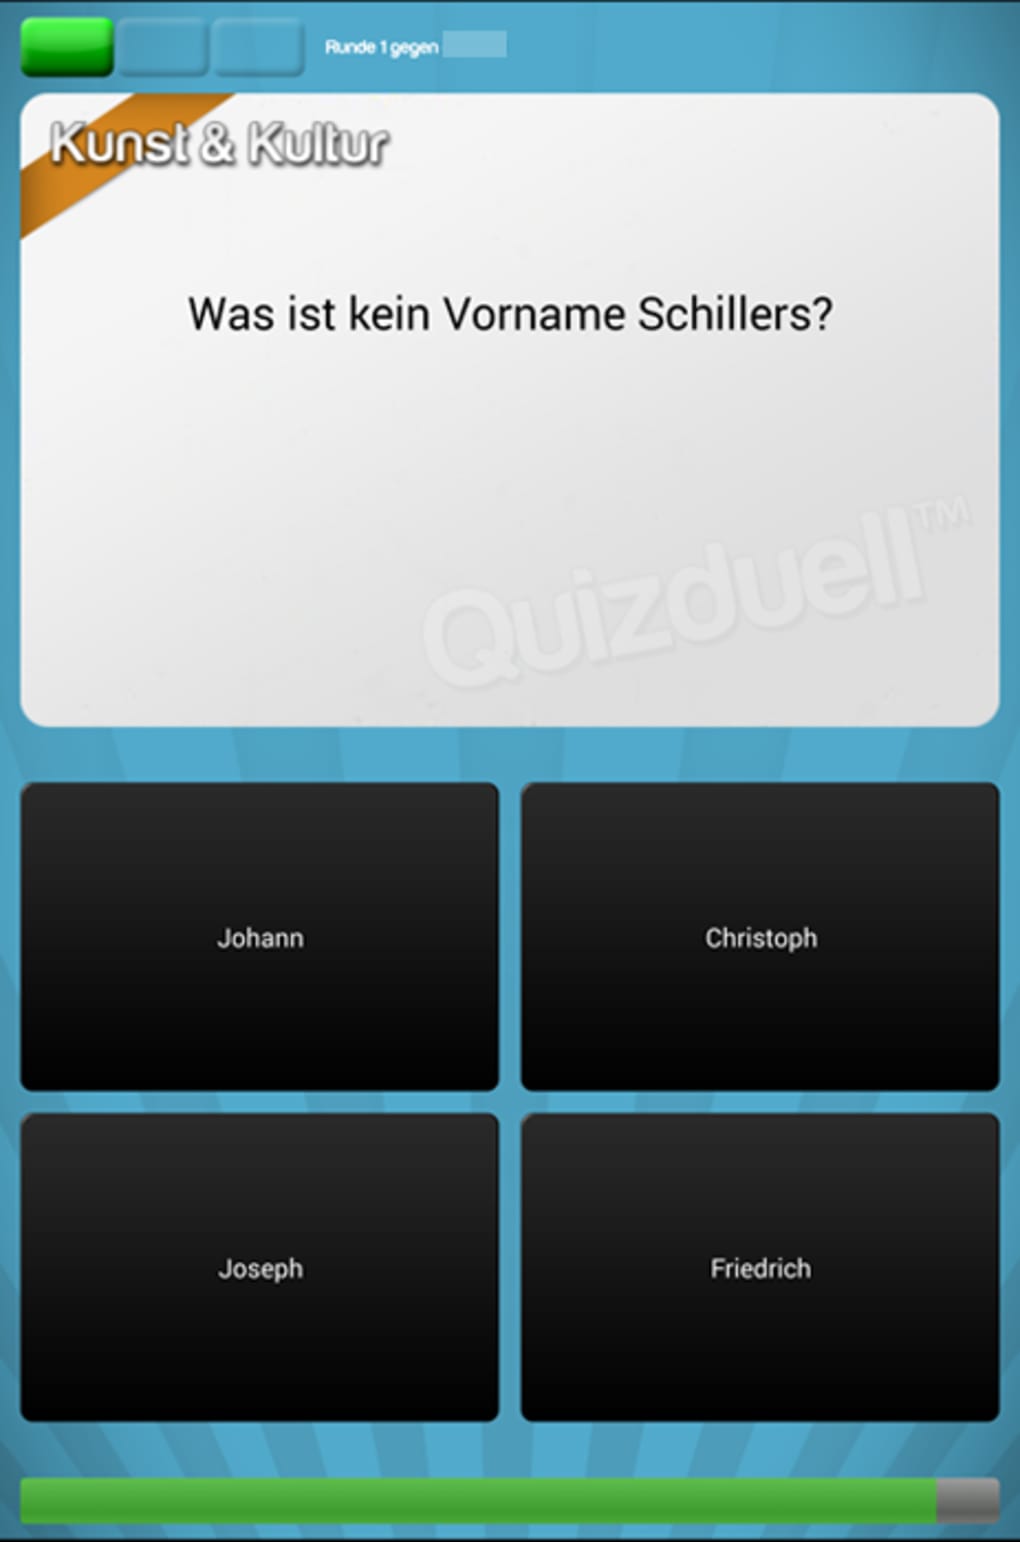 Www.Quizduell